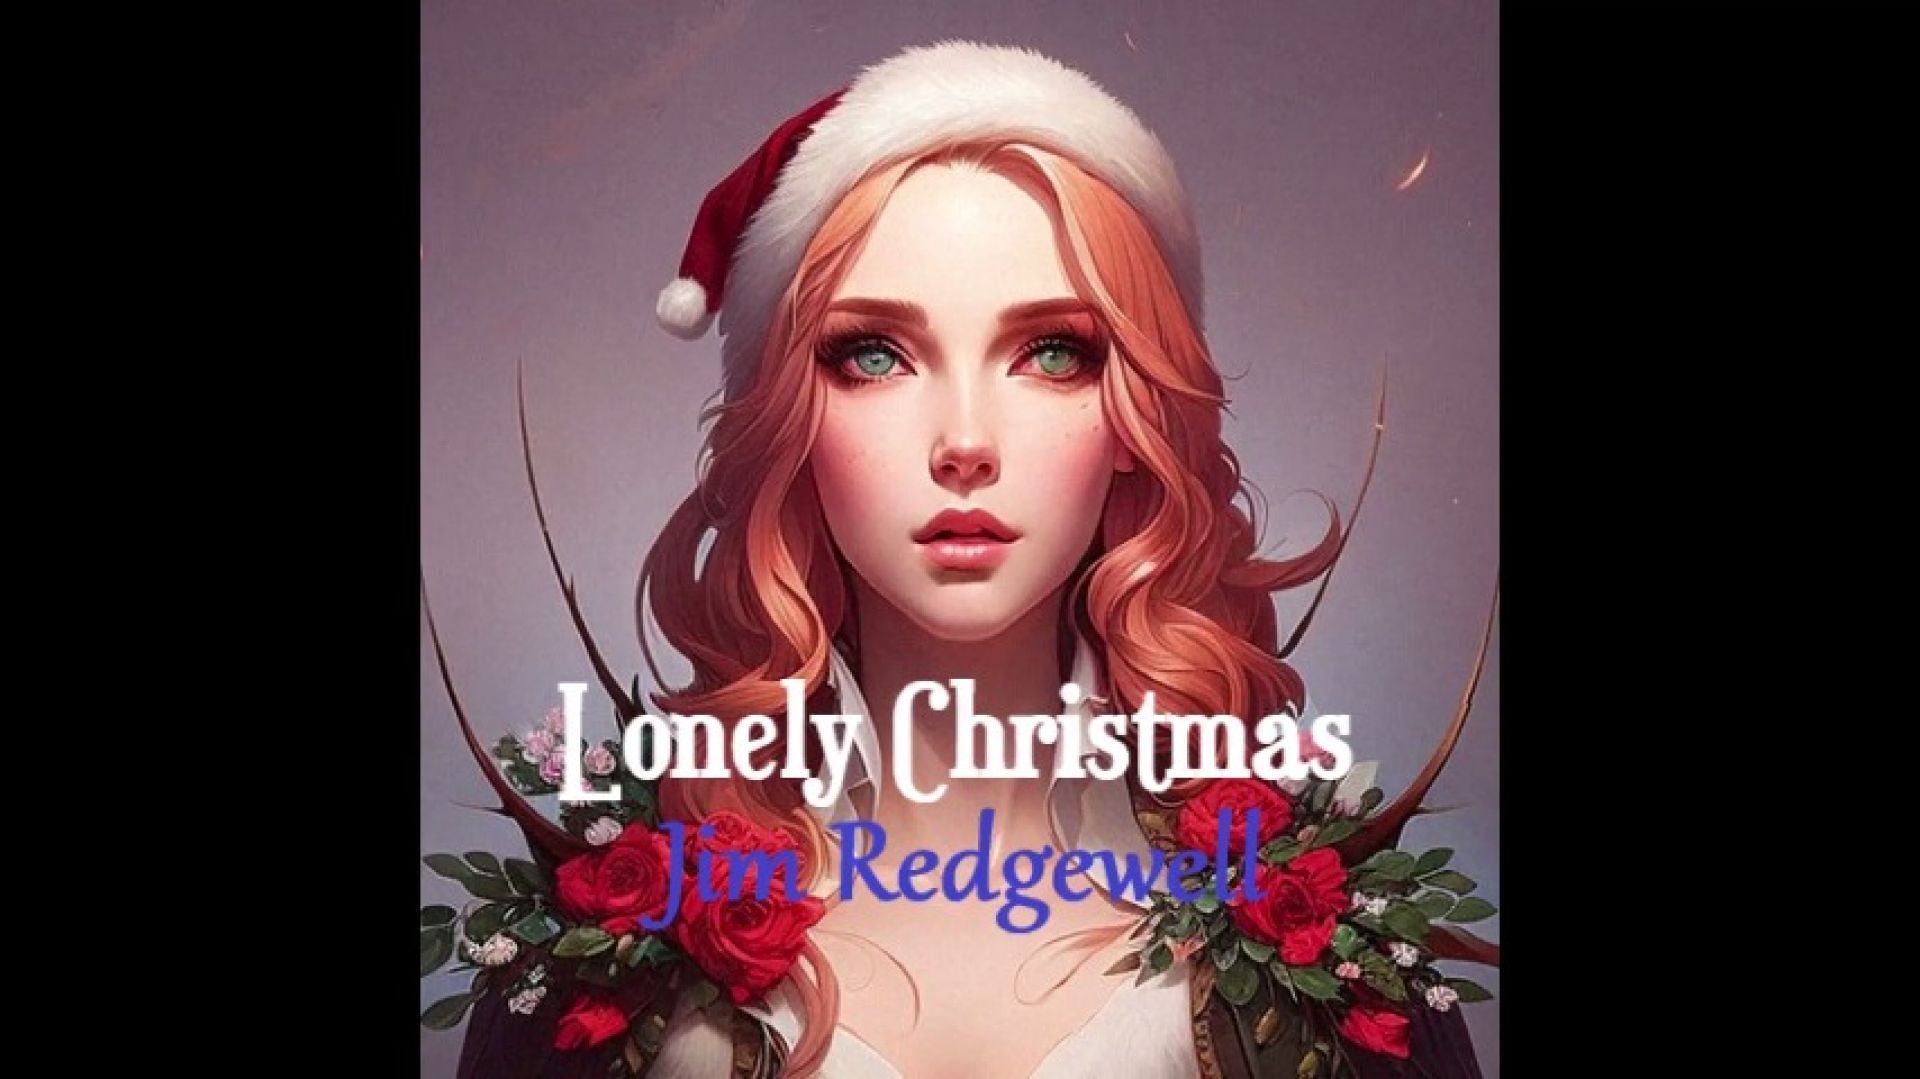 Lonely Christmas -  a music video by Jim Redgewell